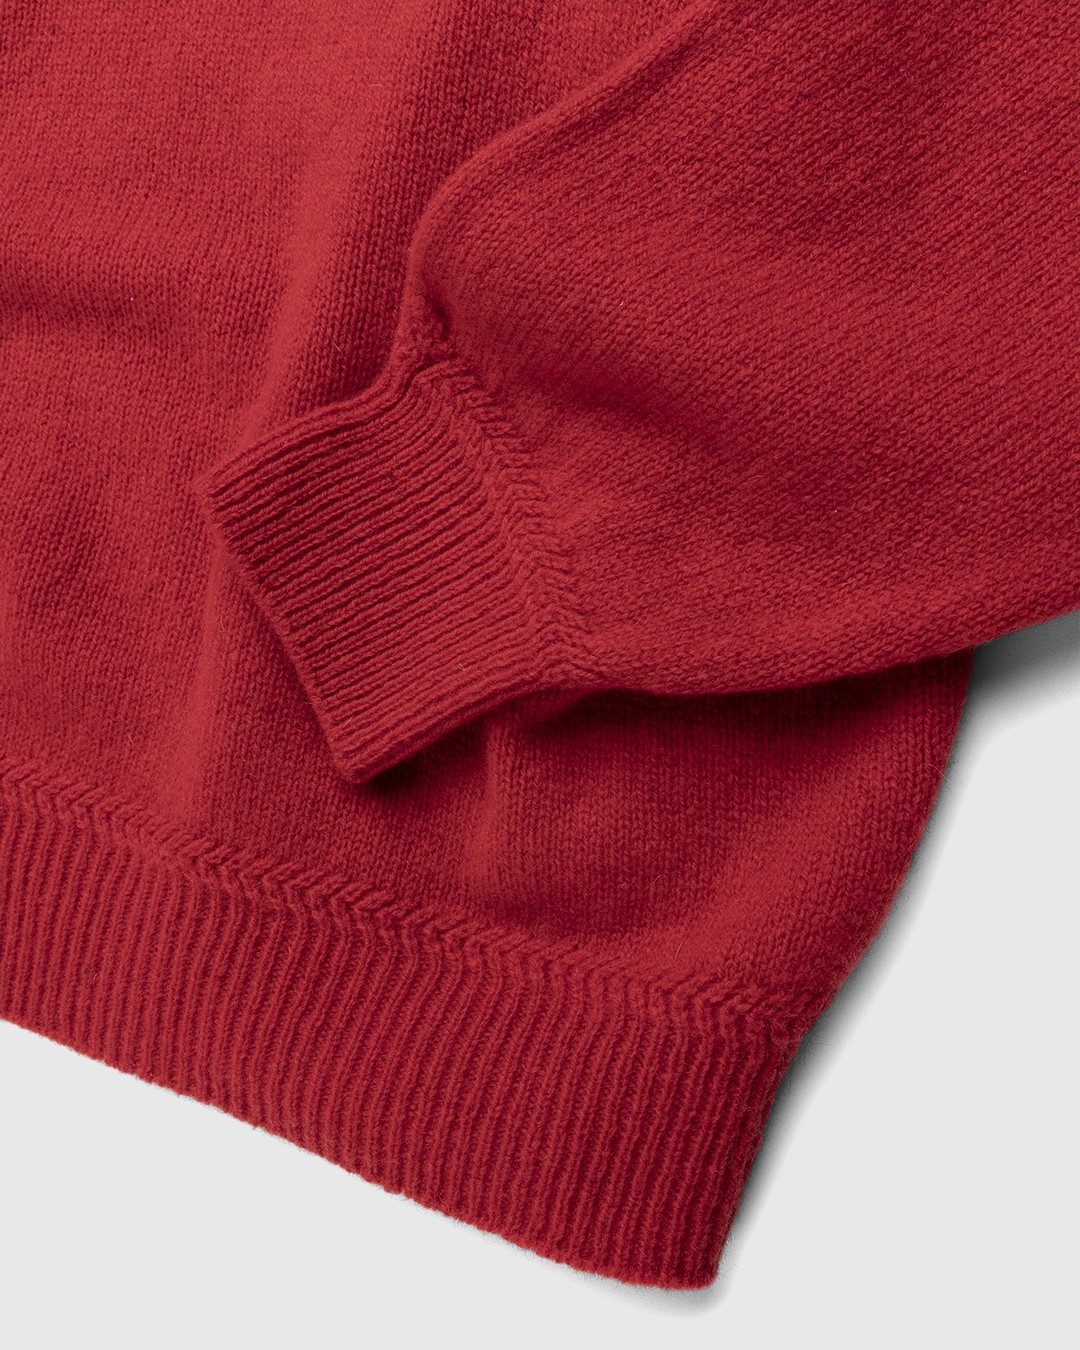 Lemaire – Seamless Shetland Wool V-Neck Sweater Poppy Red - Knitwear - Red - Image 4